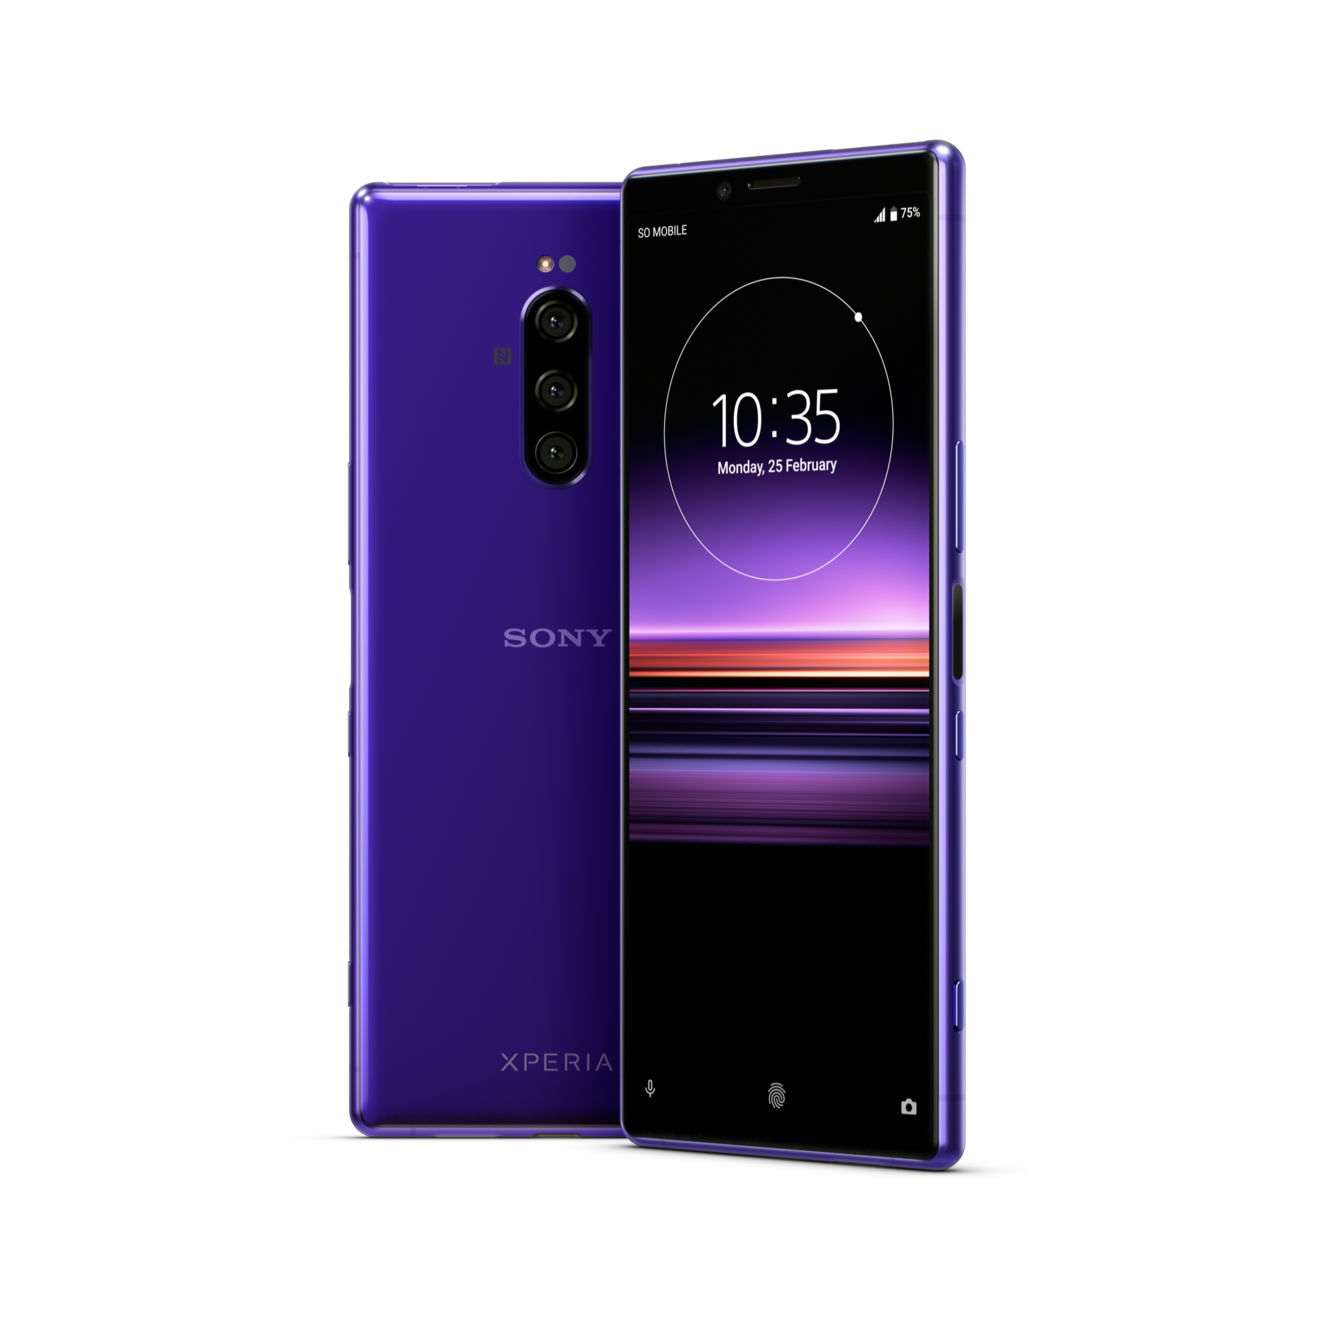 02_Xperia-1_Gallery-product-image_Purple-9c4dca7aae512d72bc837bc7f519ffcc.png